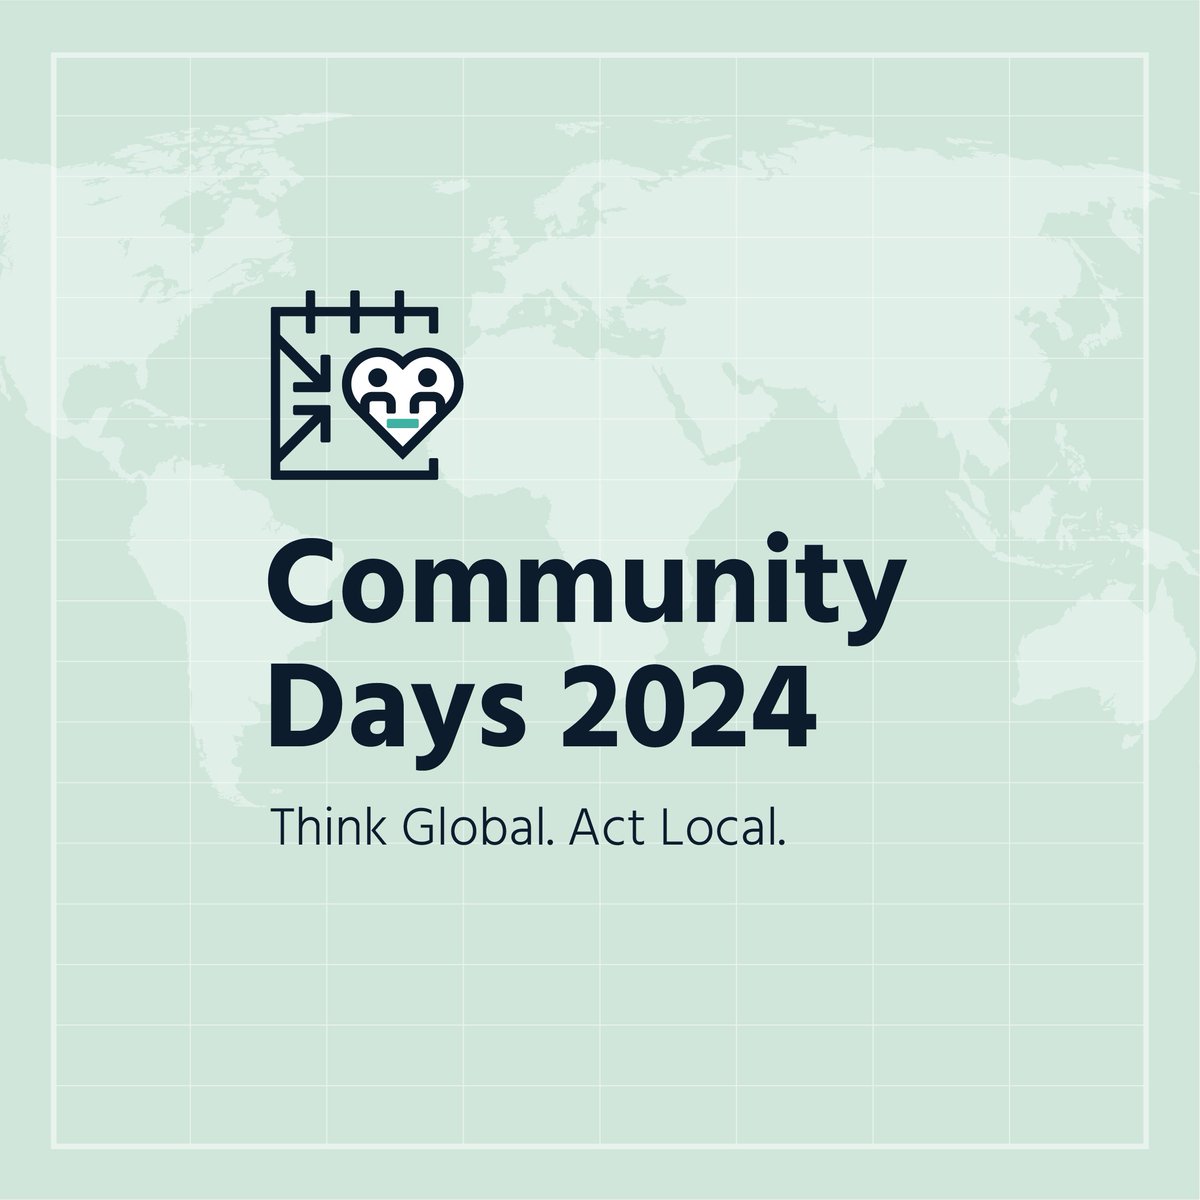 Calling all community members! 📣 We’re hosting five regional Community Days to celebrate you and everything you've accomplished. The first regional event is 16 May for Asia-Pacific! 🌏 Learn more and register: internetsociety.org/events/communi…